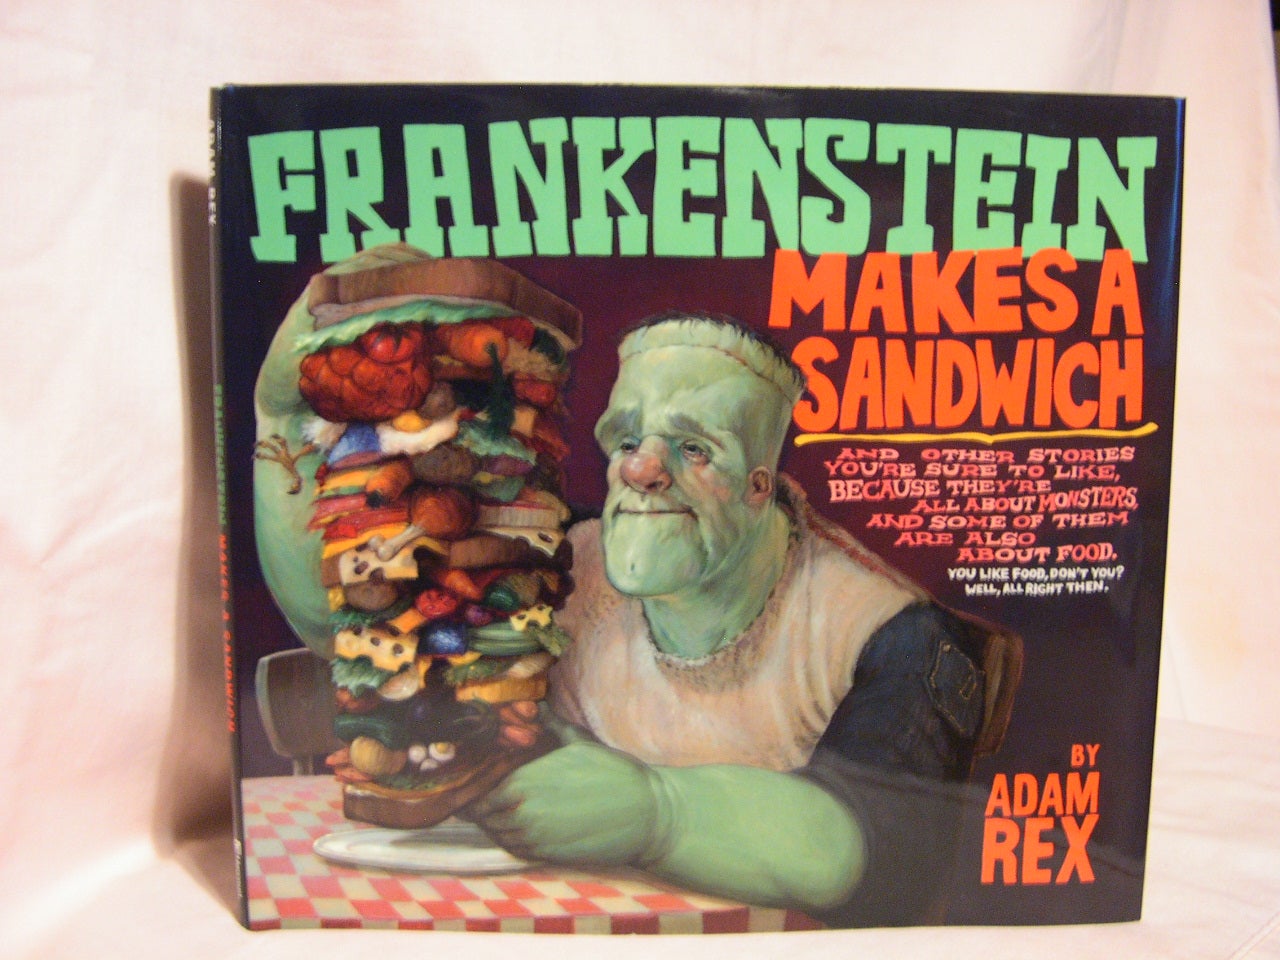 OF　AND　ABOUT　THEY'RE　ALSO　SURE　ABOUT　OTHER　second　YOU'RE　BECAUSE　MAKES　FOOD　First　Adam　AND　ALL　LIKE,　FRANKENSTEIN　edition,　Rex　TO　SOME　printing　A　THEM　SANDWICH,　STORIES　MONSTERS,　ARE